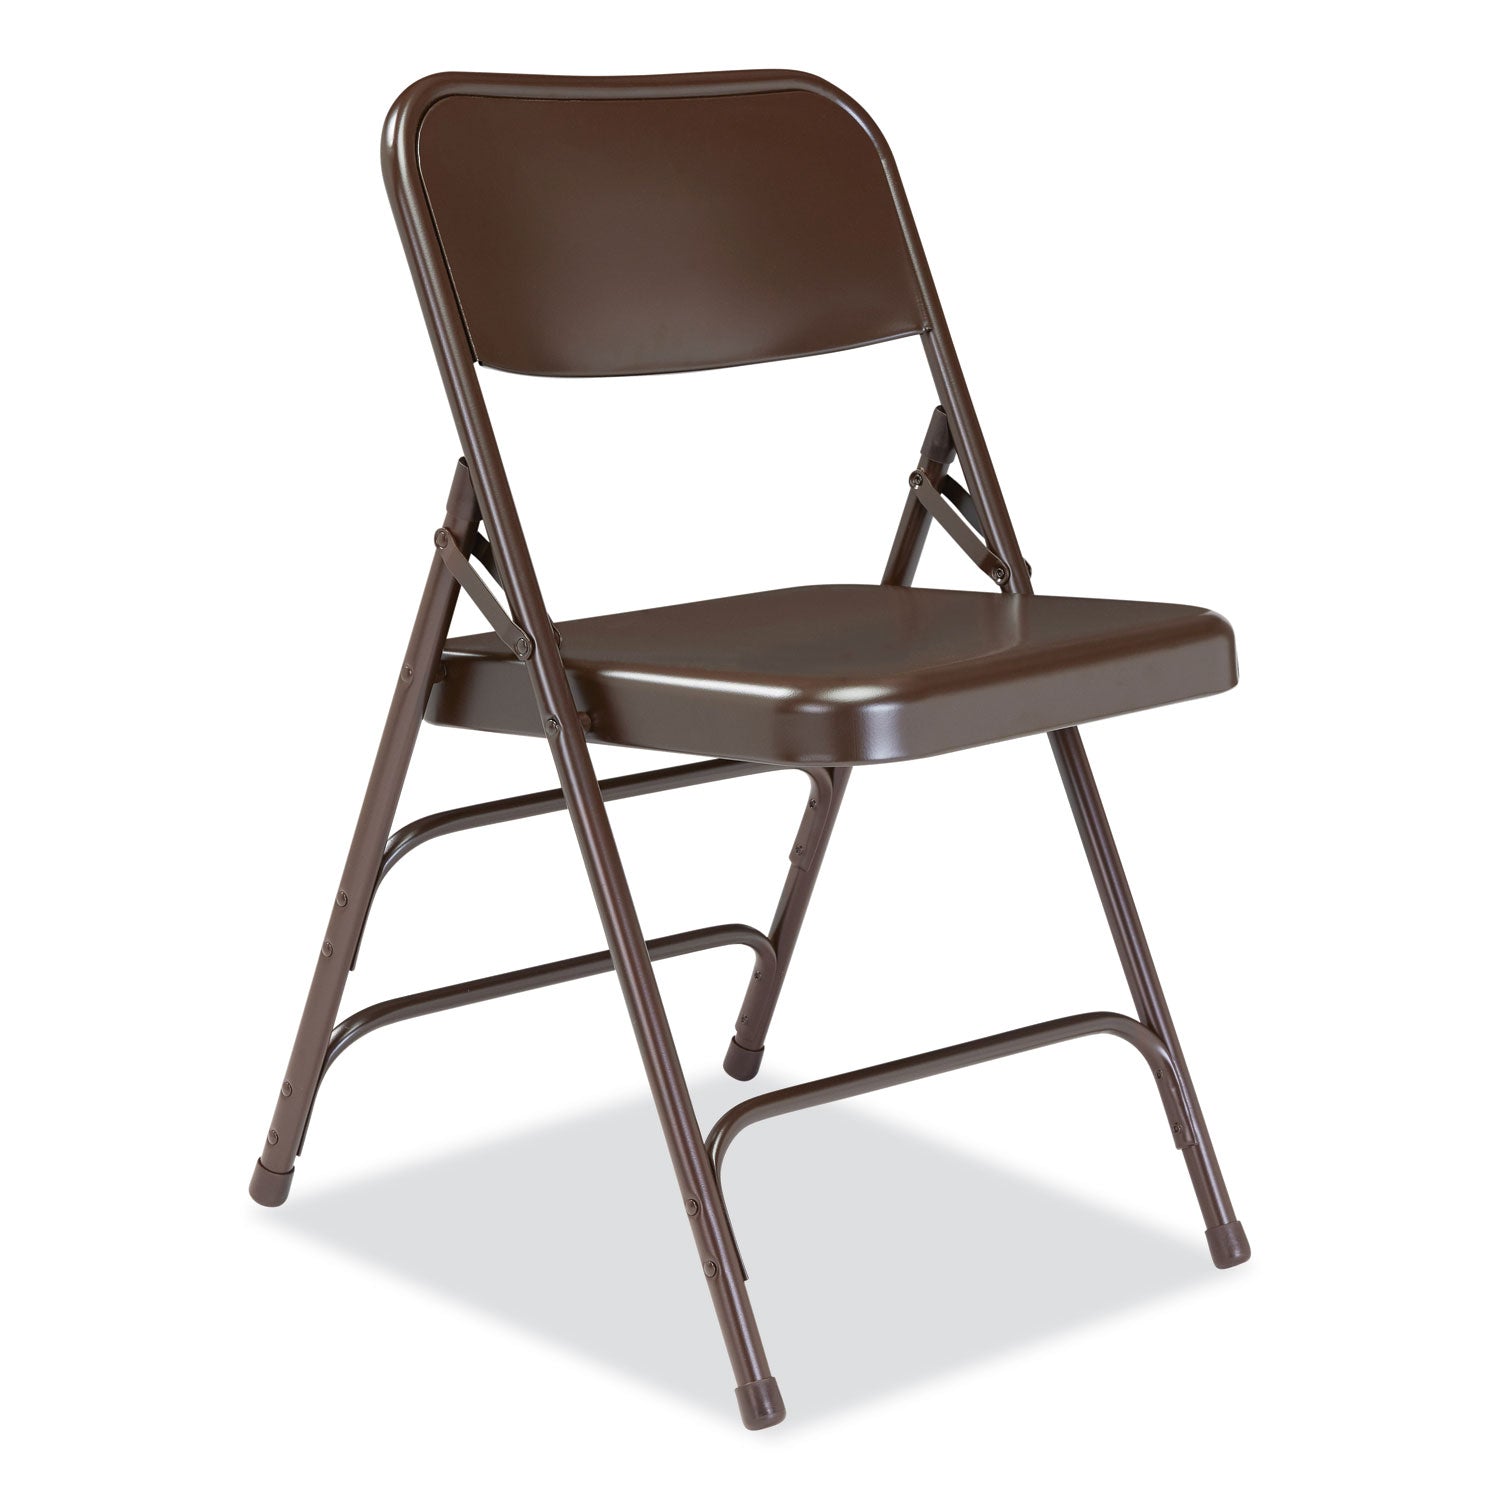 300-series-deluxe-all-steel-triple-brace-folding-chair-supports-480-lb-1725-seat-ht-brown-4-ct-ships-in-1-3-bus-days_nps303 - 2